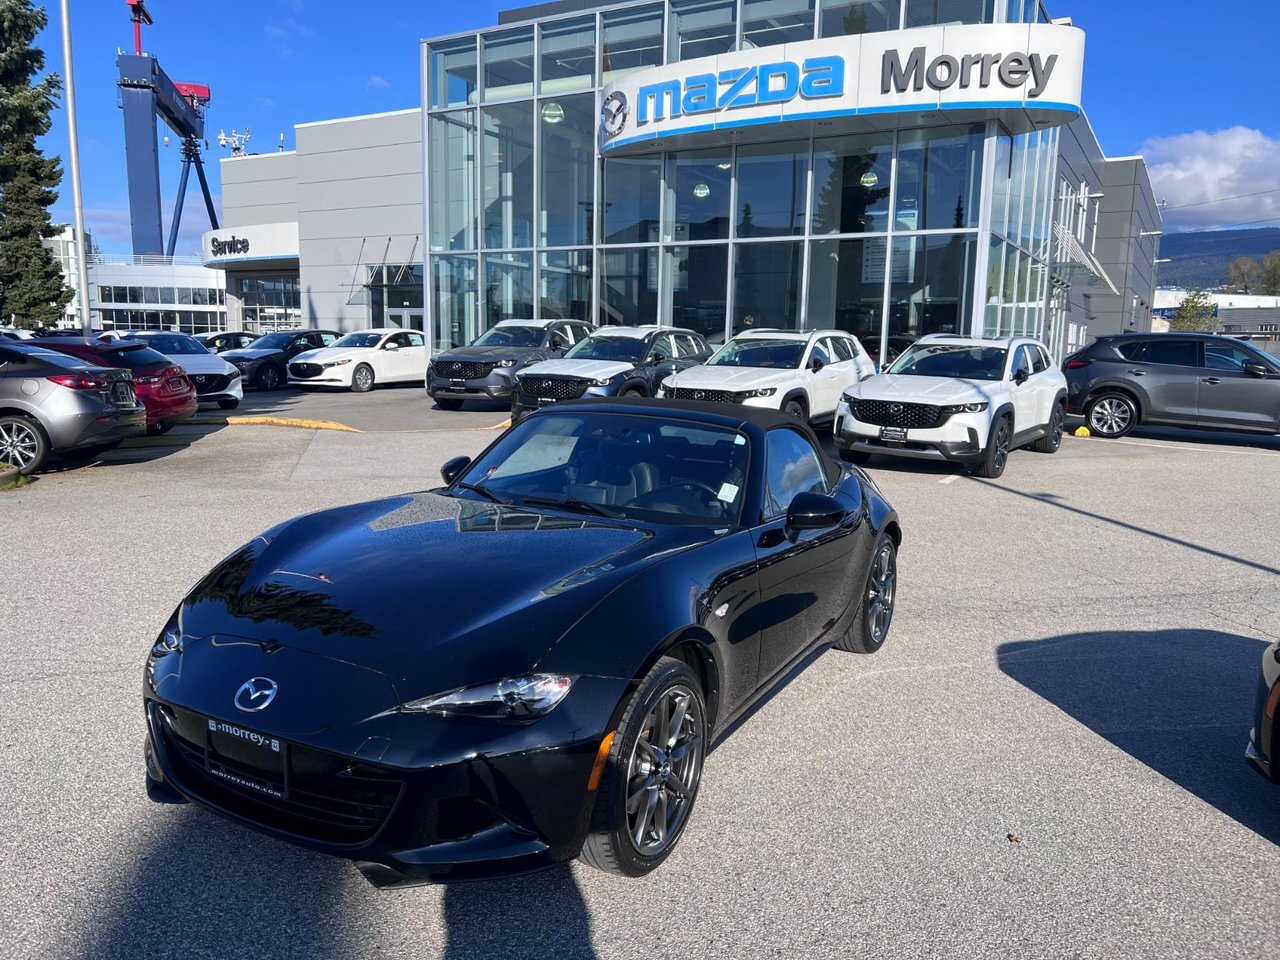 2019 Mazda MX-5 GT 6sp A Beauty! Fun in the sun! Check out this to